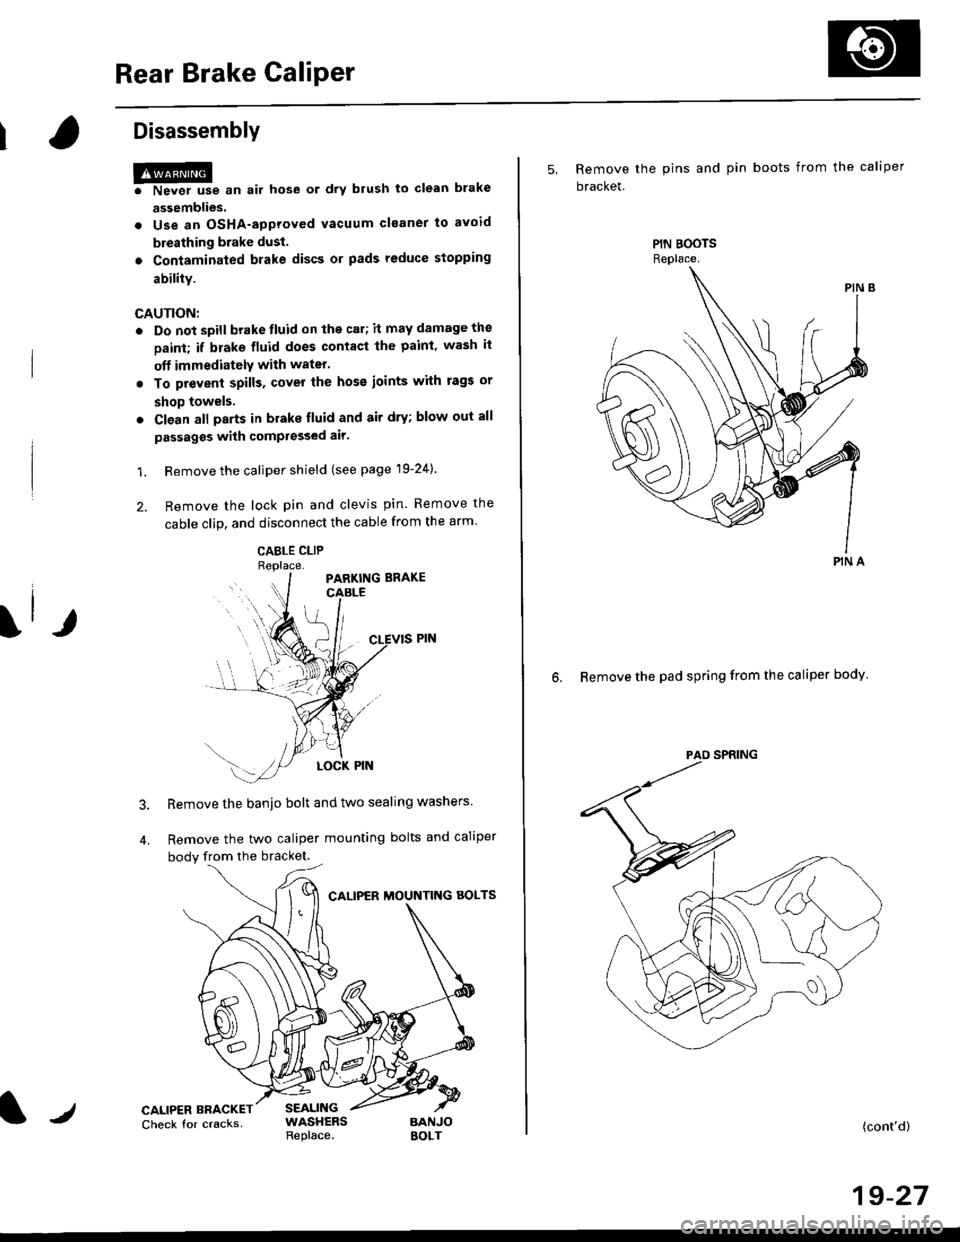 HONDA CIVIC 2000 6.G Owners Manual Rear Brake Caliper
Disassembly
@f l,lever use an air hose or dry brush to clean
assemblies.
. Use an OsHA-approved vacuum cleaner to
brake
avoid
breathing brake dust.
. Contaminated brake discs or pa